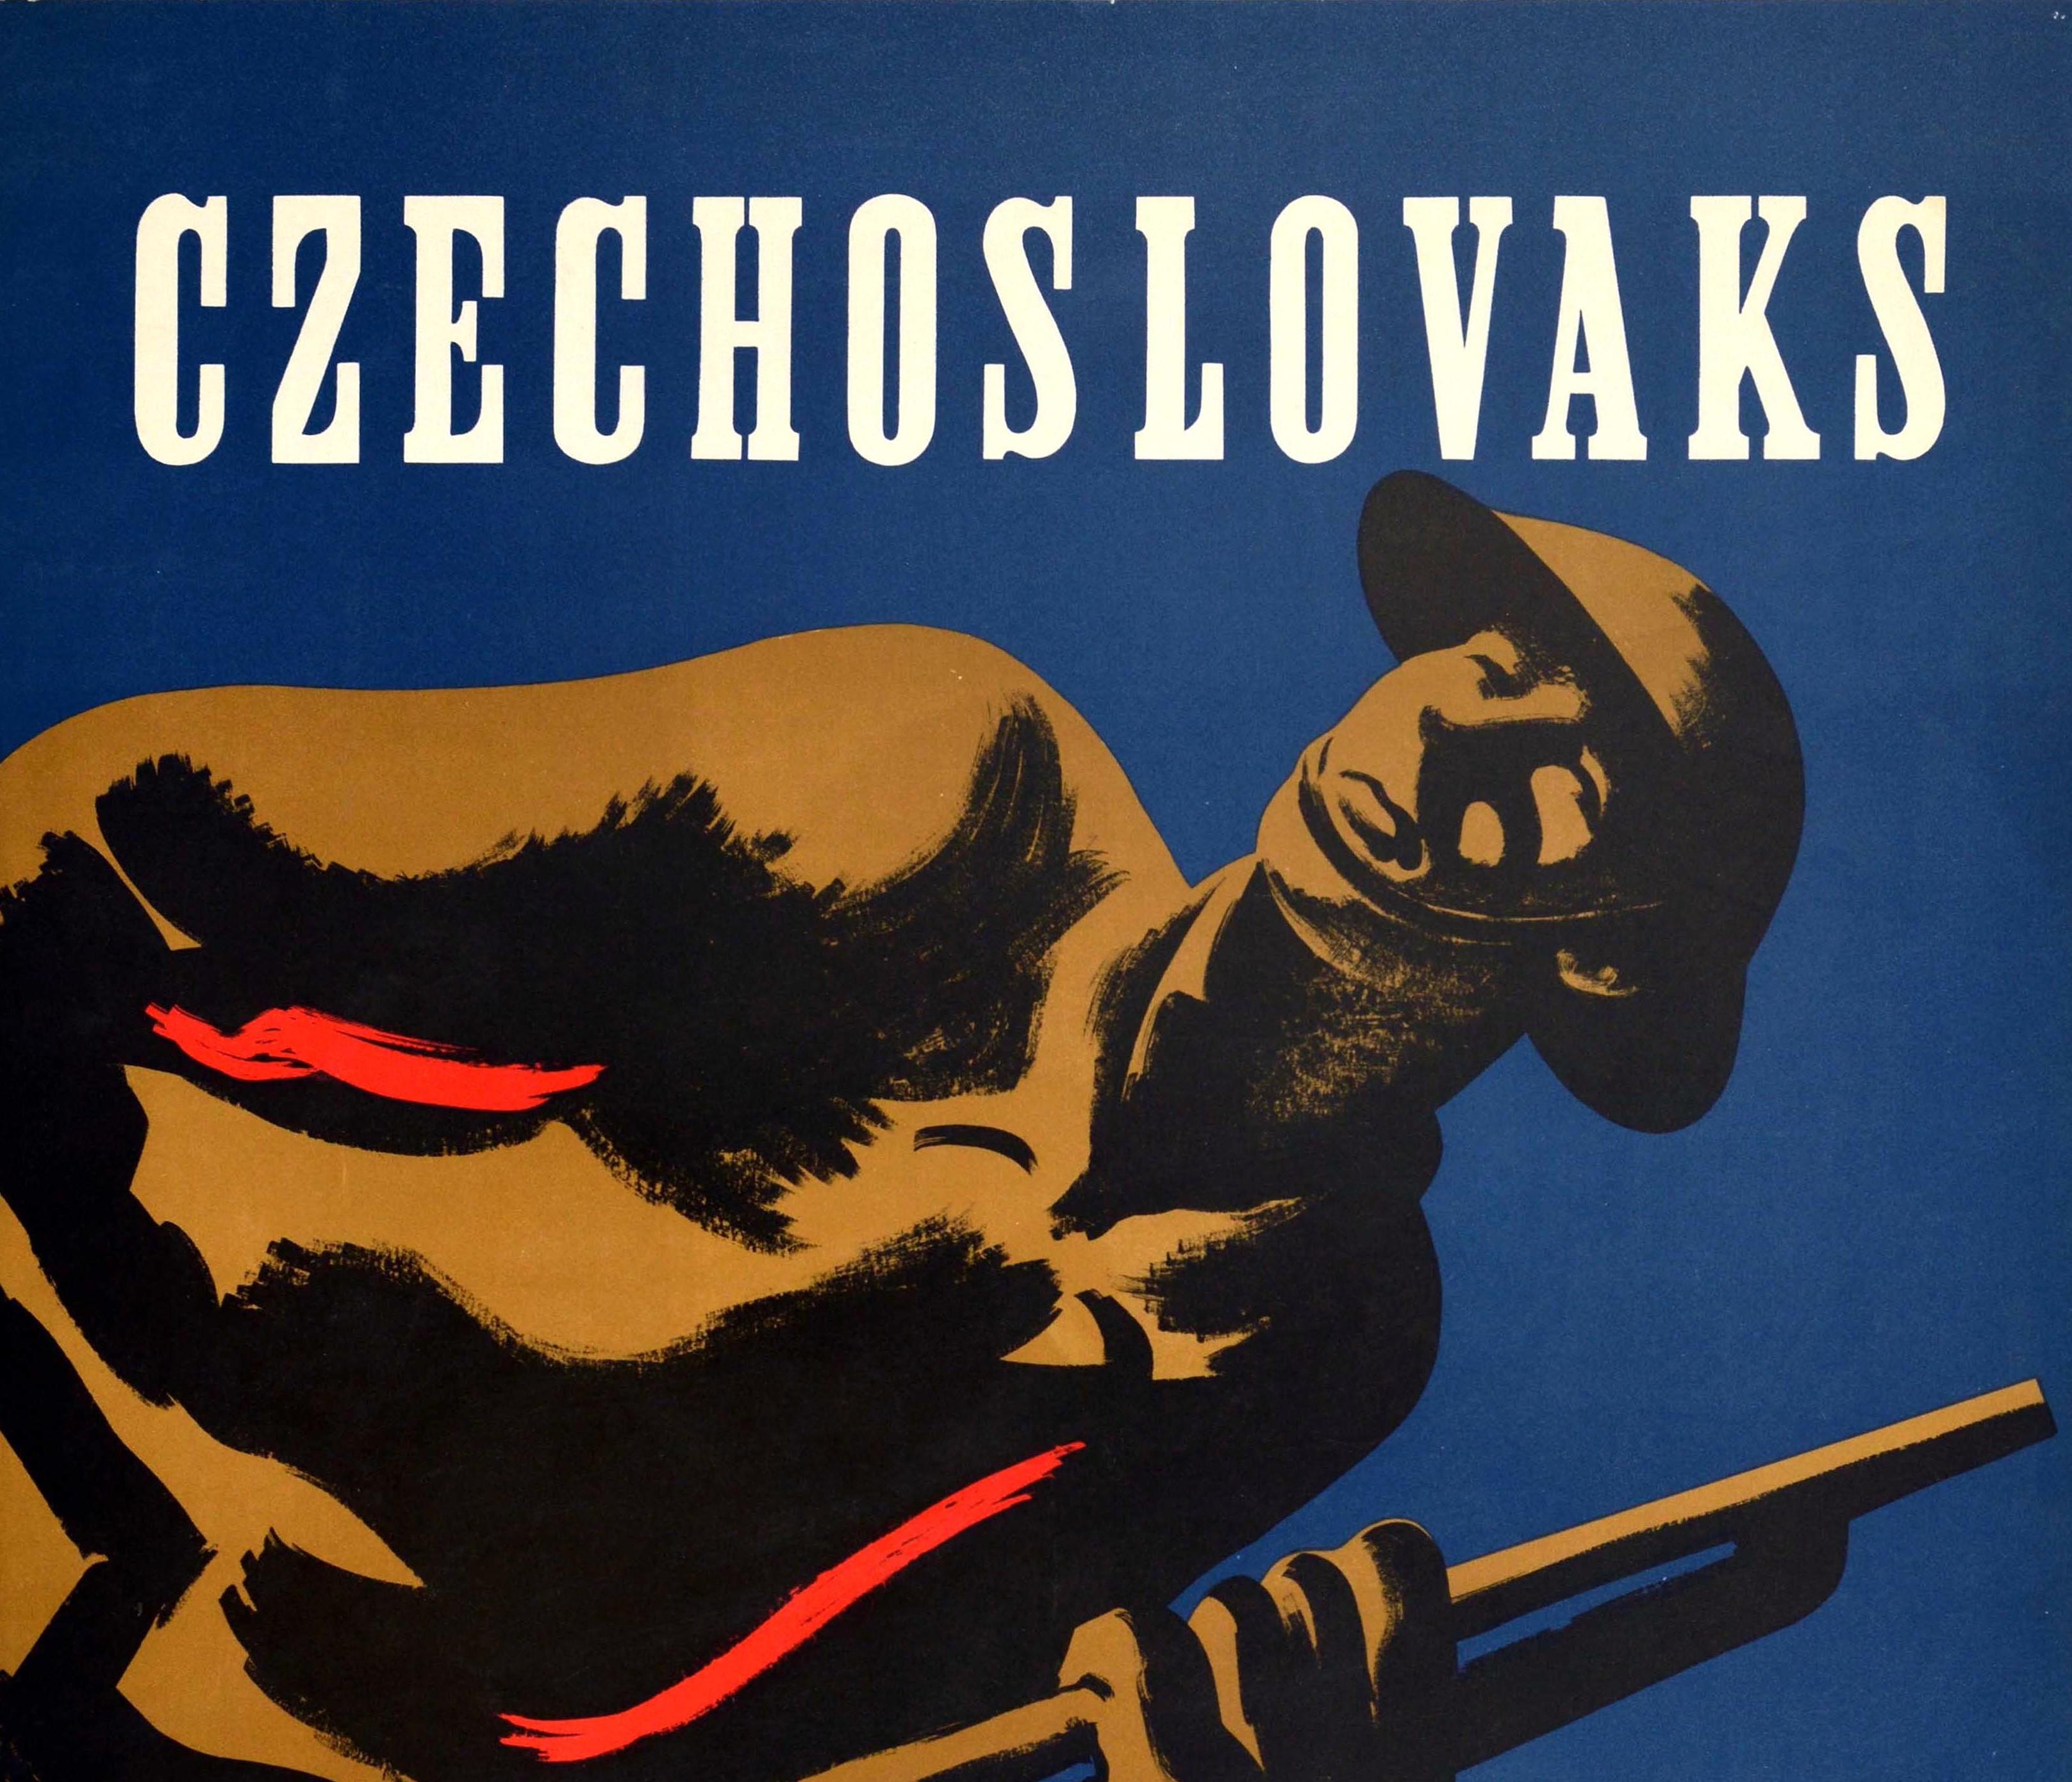 Original vintage World War Two propaganda poster - Czechoslovaks Carry On - featuring a dynamic image of a soldier holding a rifle gun in front of soldiers and flags against the deep blue background, the bold white lettering above and below. Very